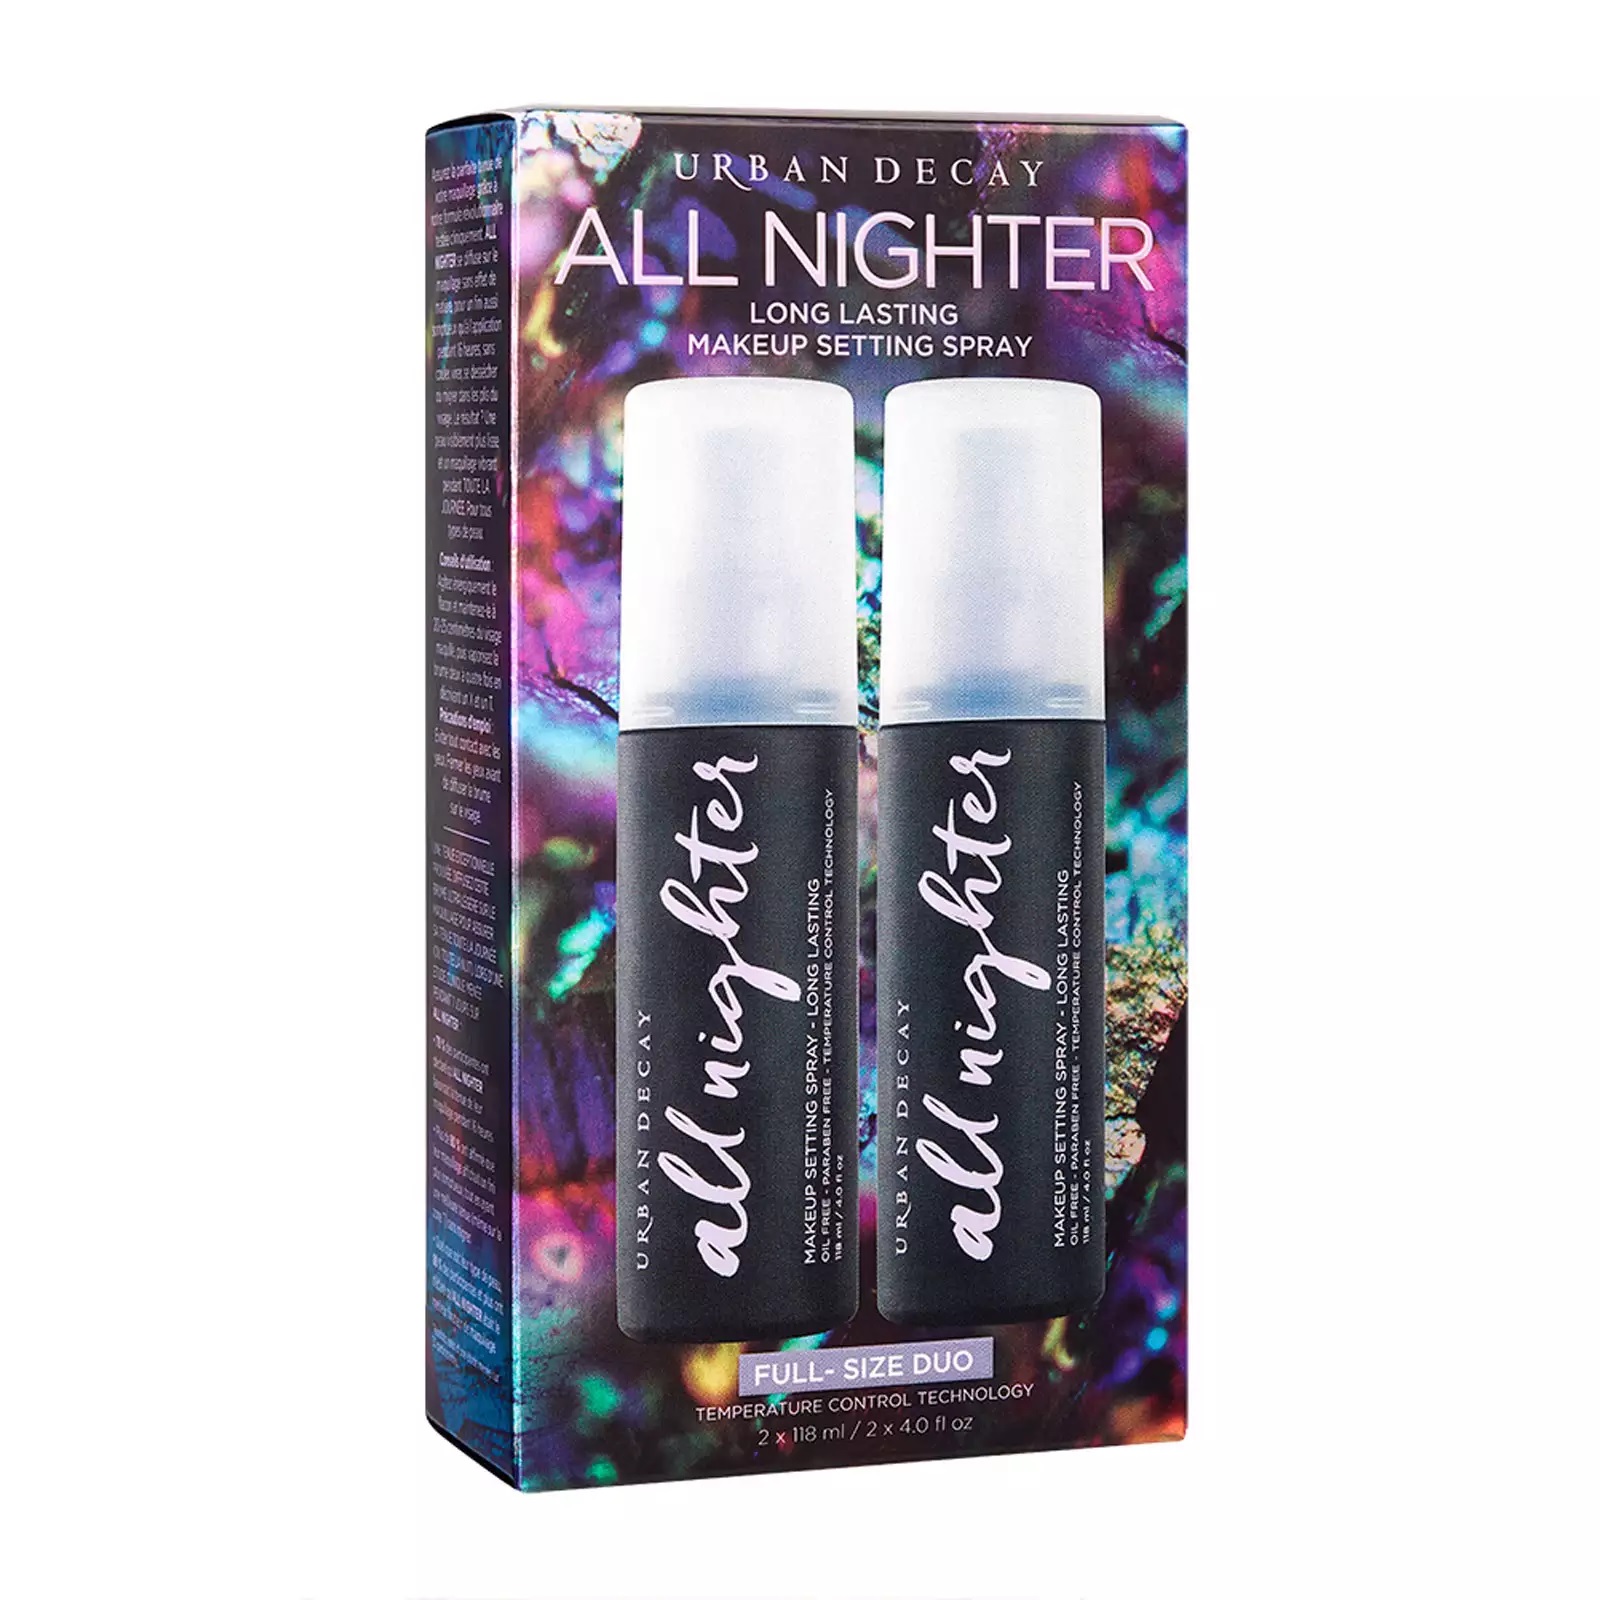 Urban Decay All Nighter Setting Spray Duo Gift Set